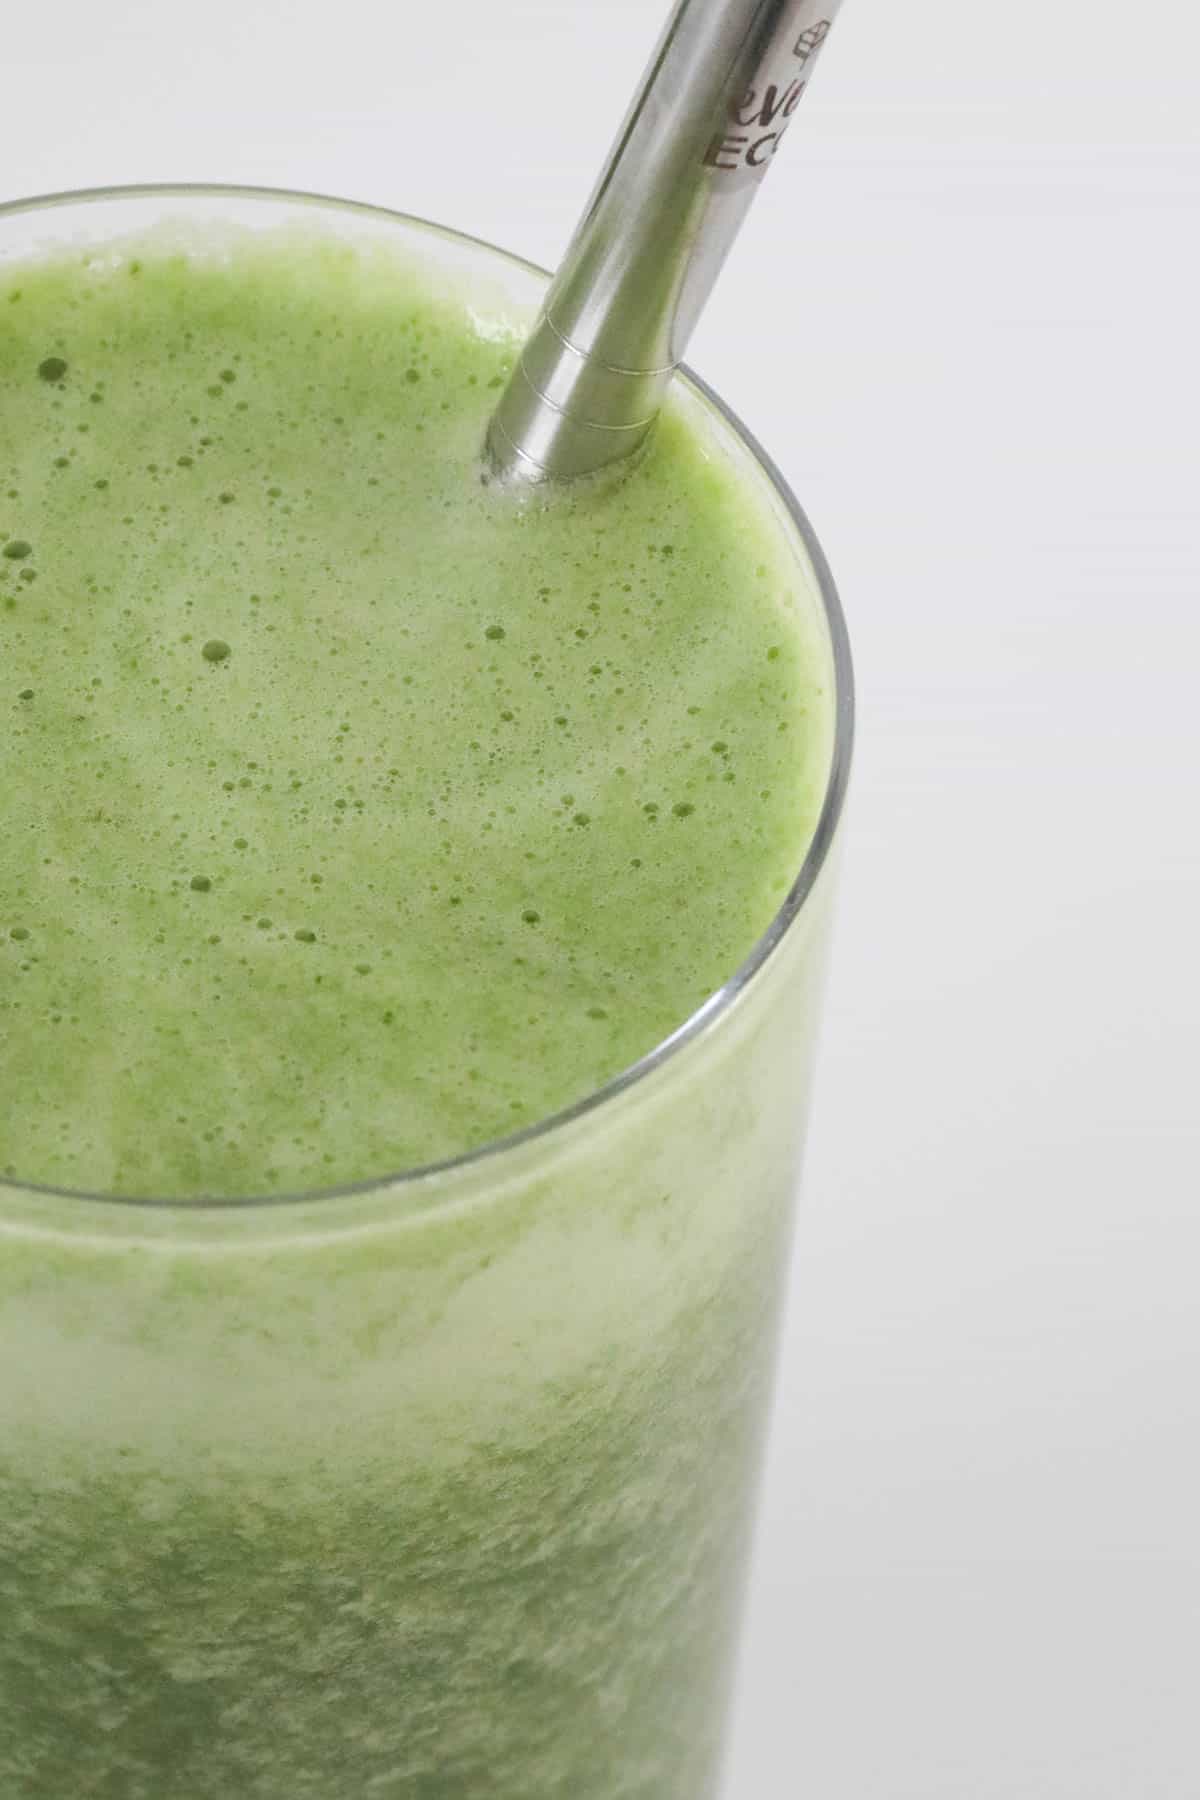 A healthy green juice in a glass.